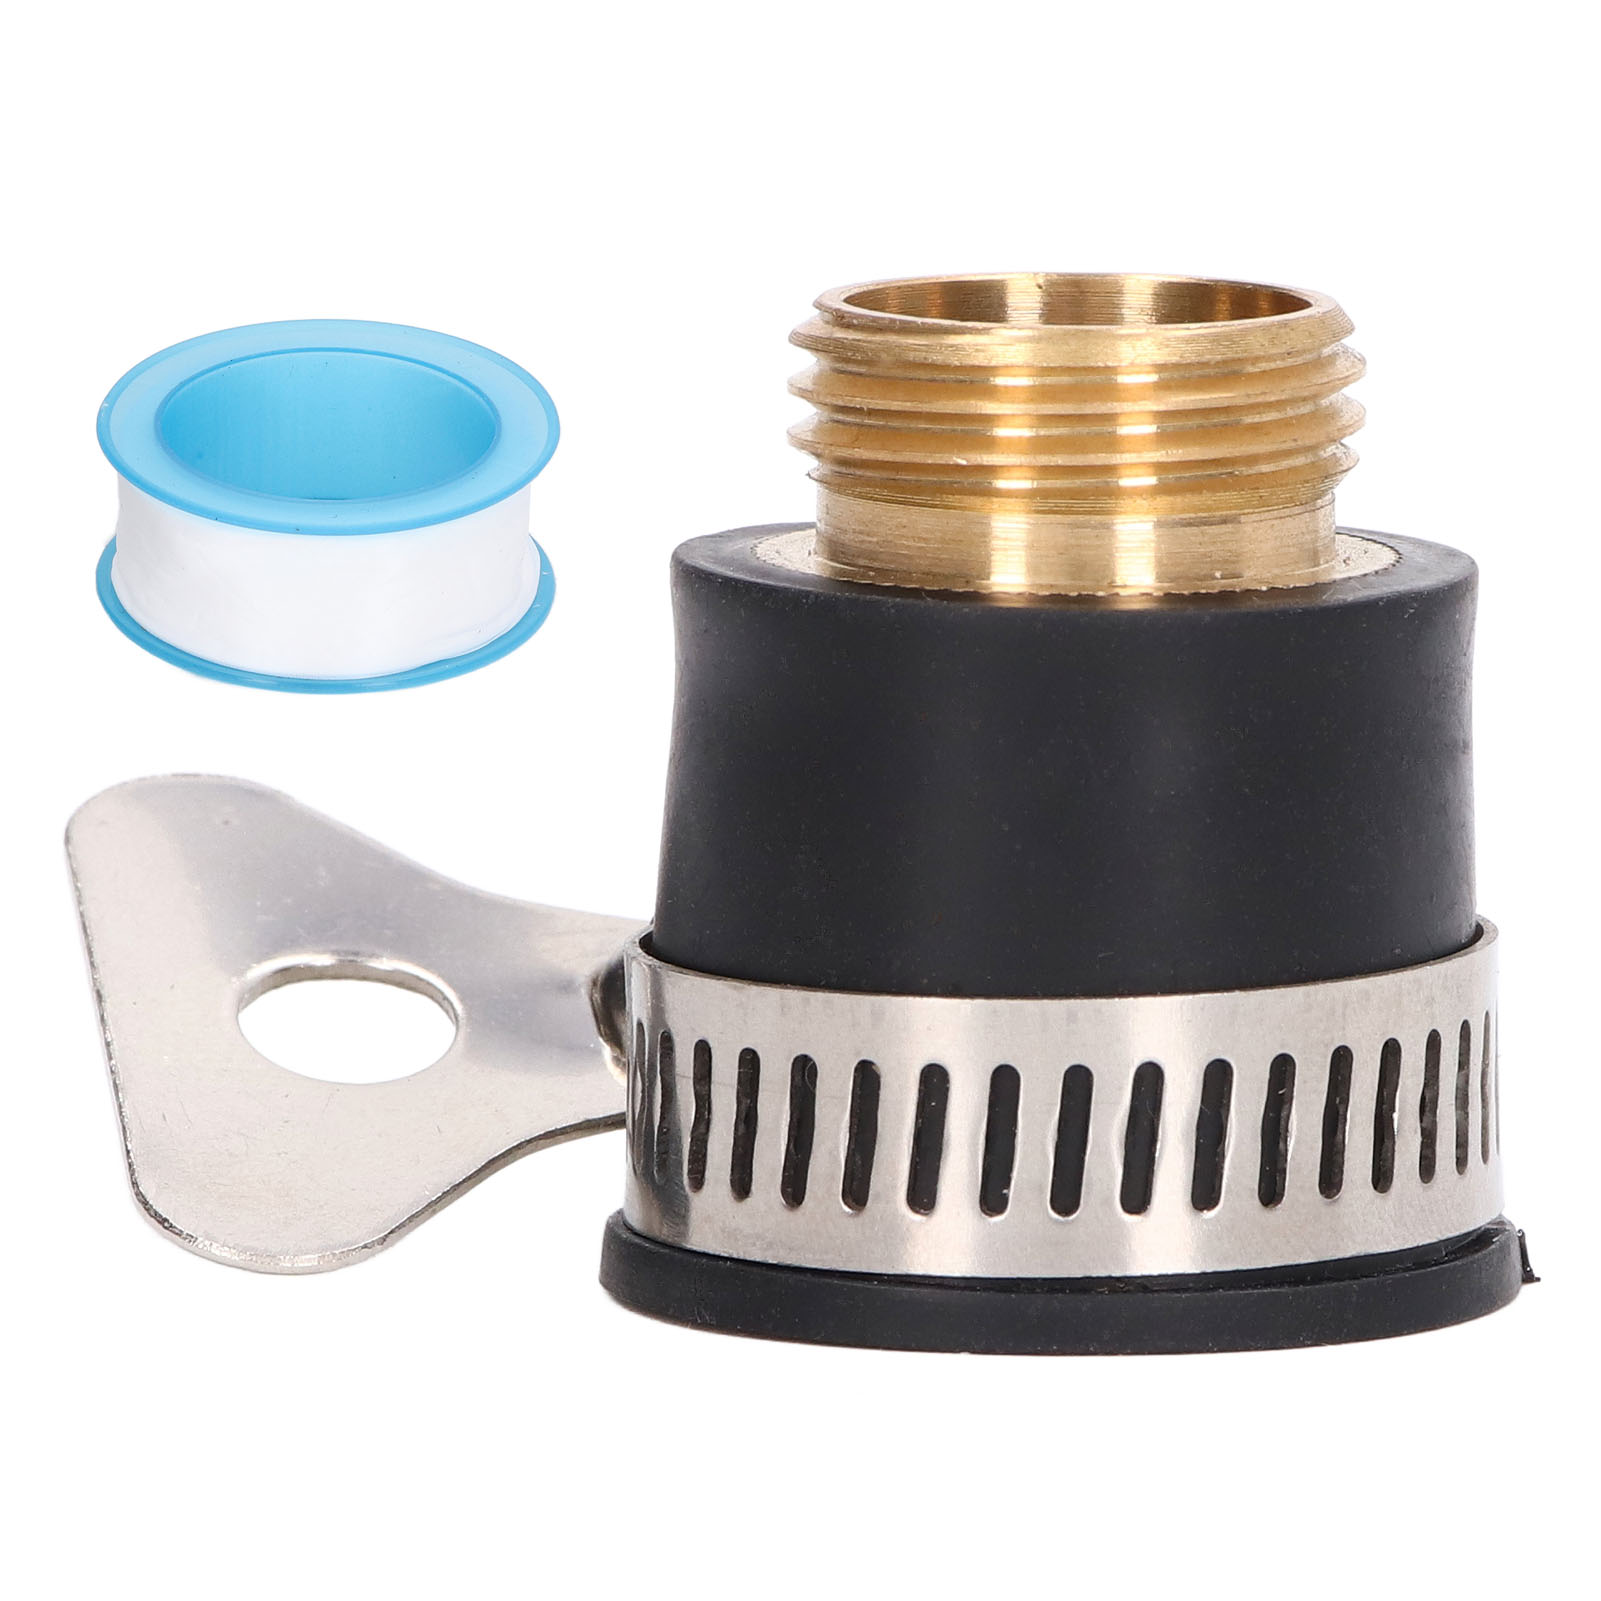 FAGINEY Faucet Tap Connector Adapter Universal Garden Kitchen Water Hose Pipe Quick Joint 1/2in,Water Hose Tap Faucet Connector Adapter,Universal Tap Connector Adapter - image 4 of 8